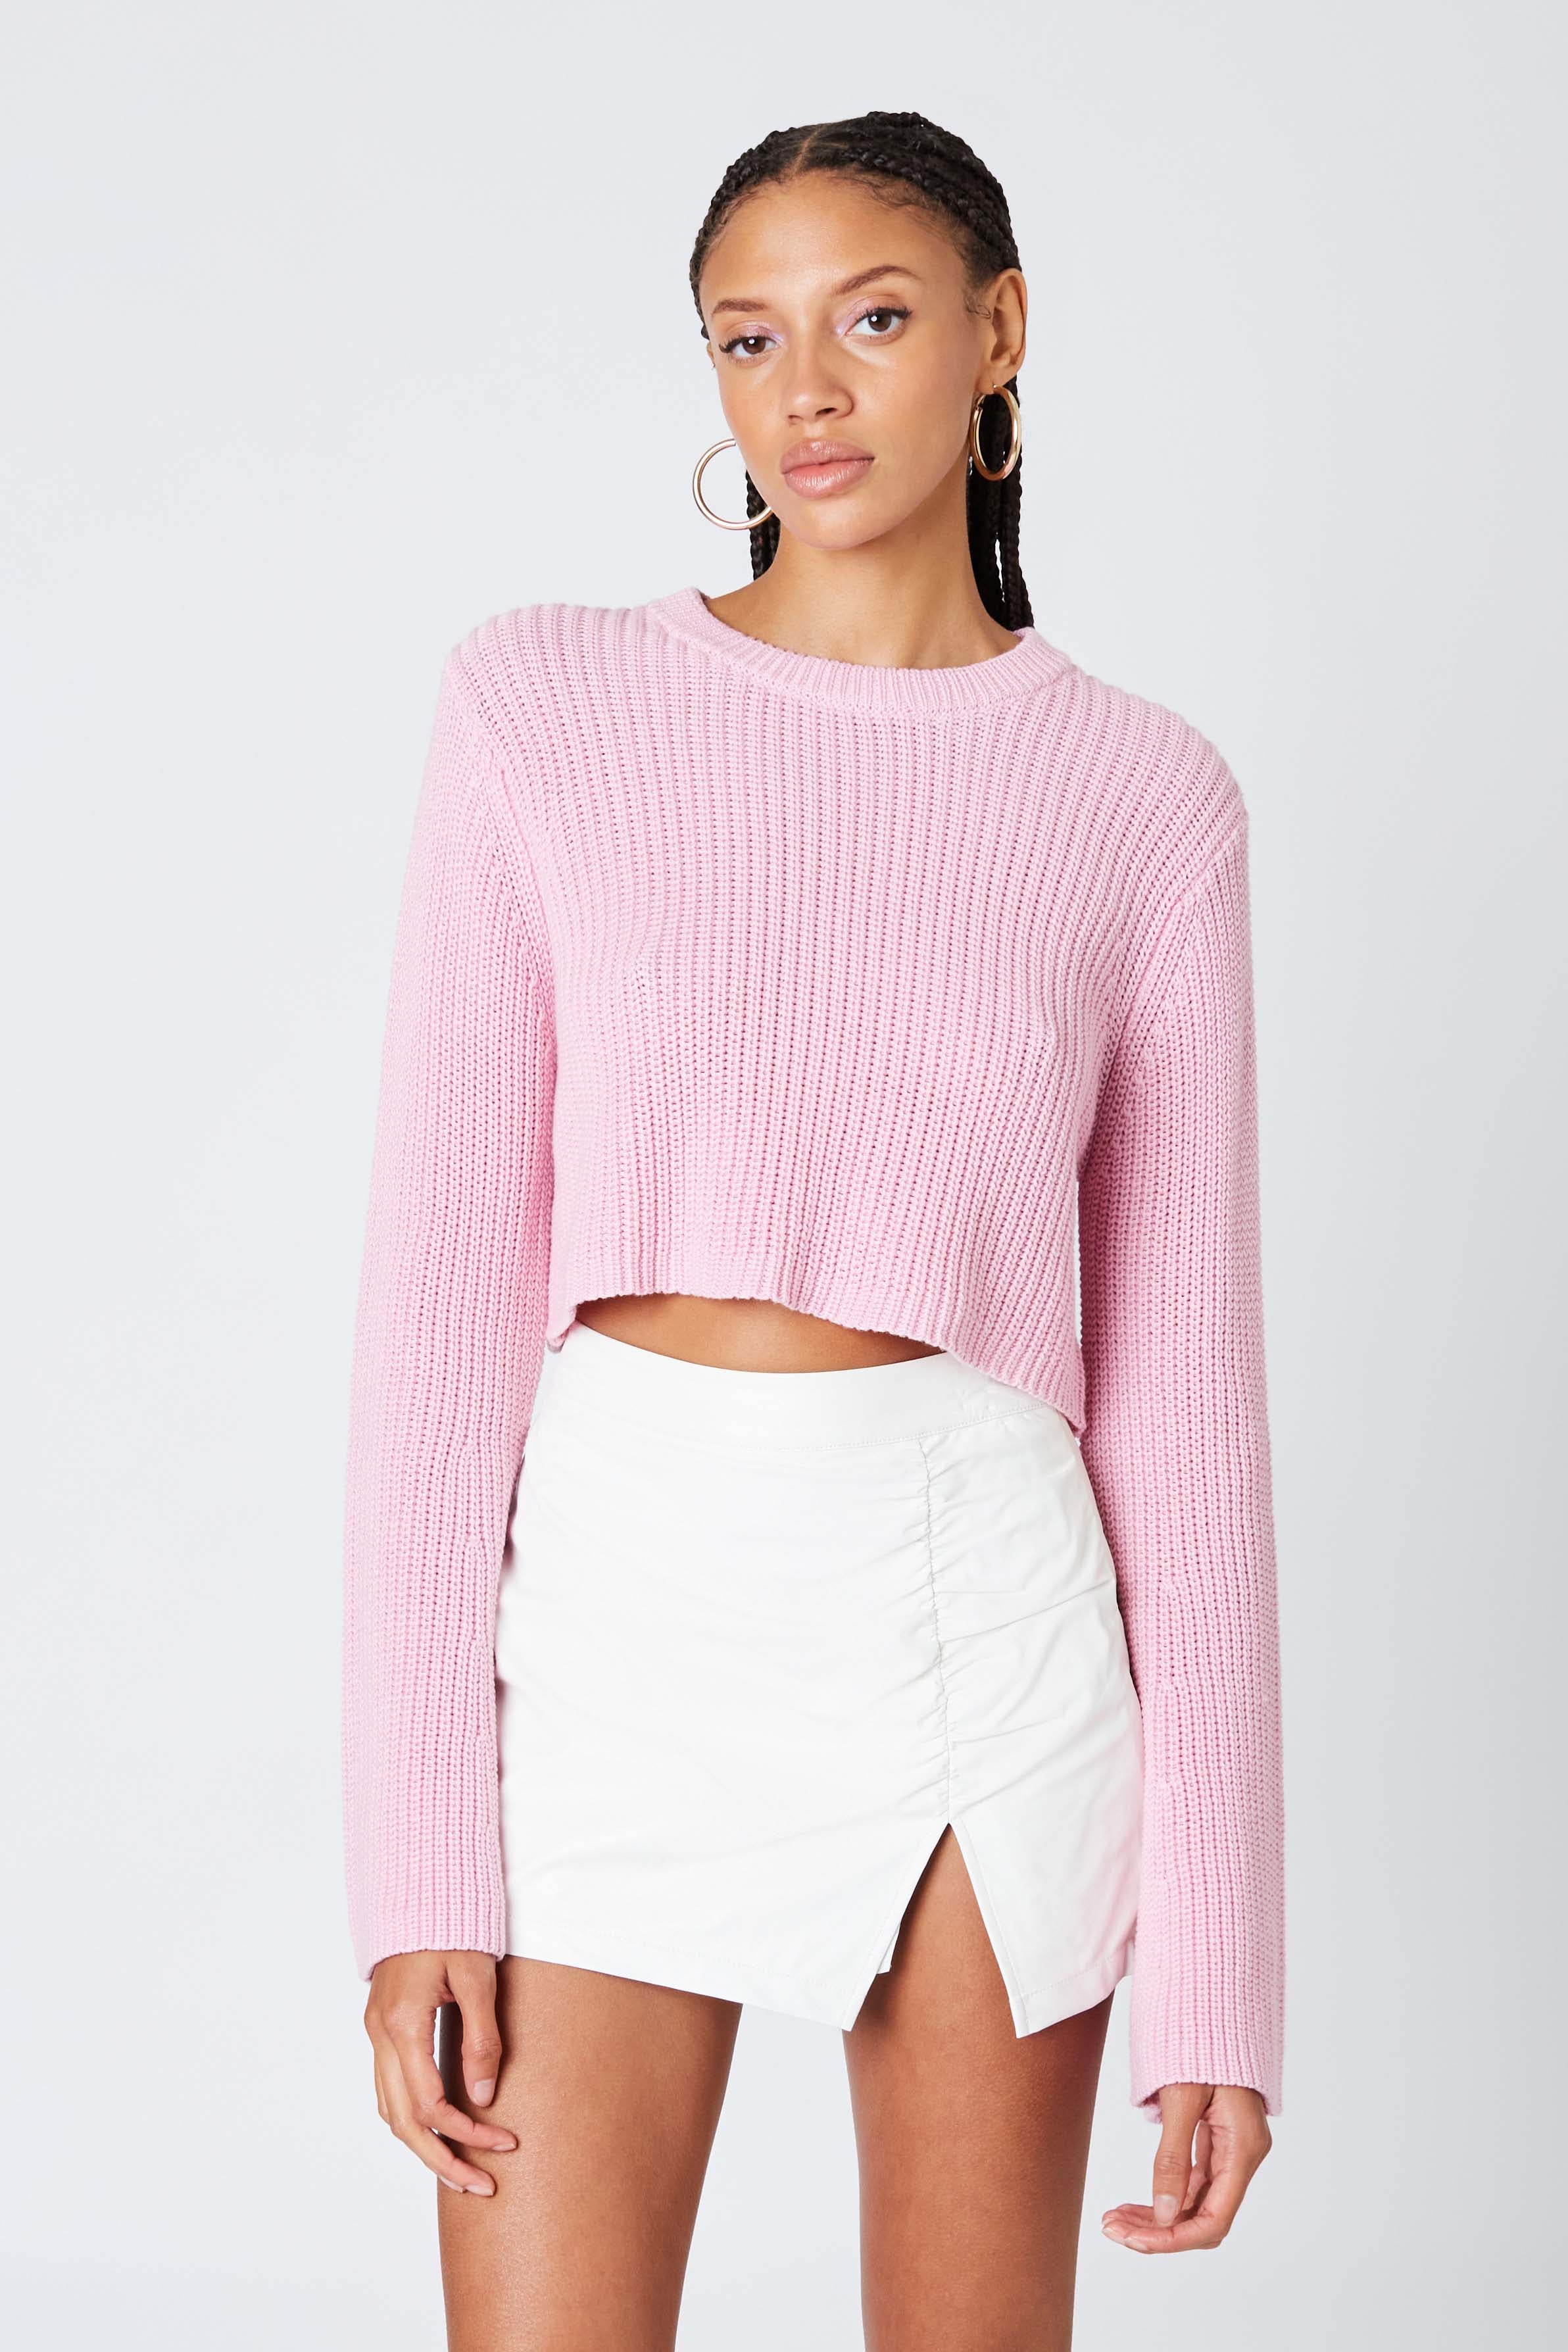 Cropped Crewneck Sweater in Petal Pink Front View